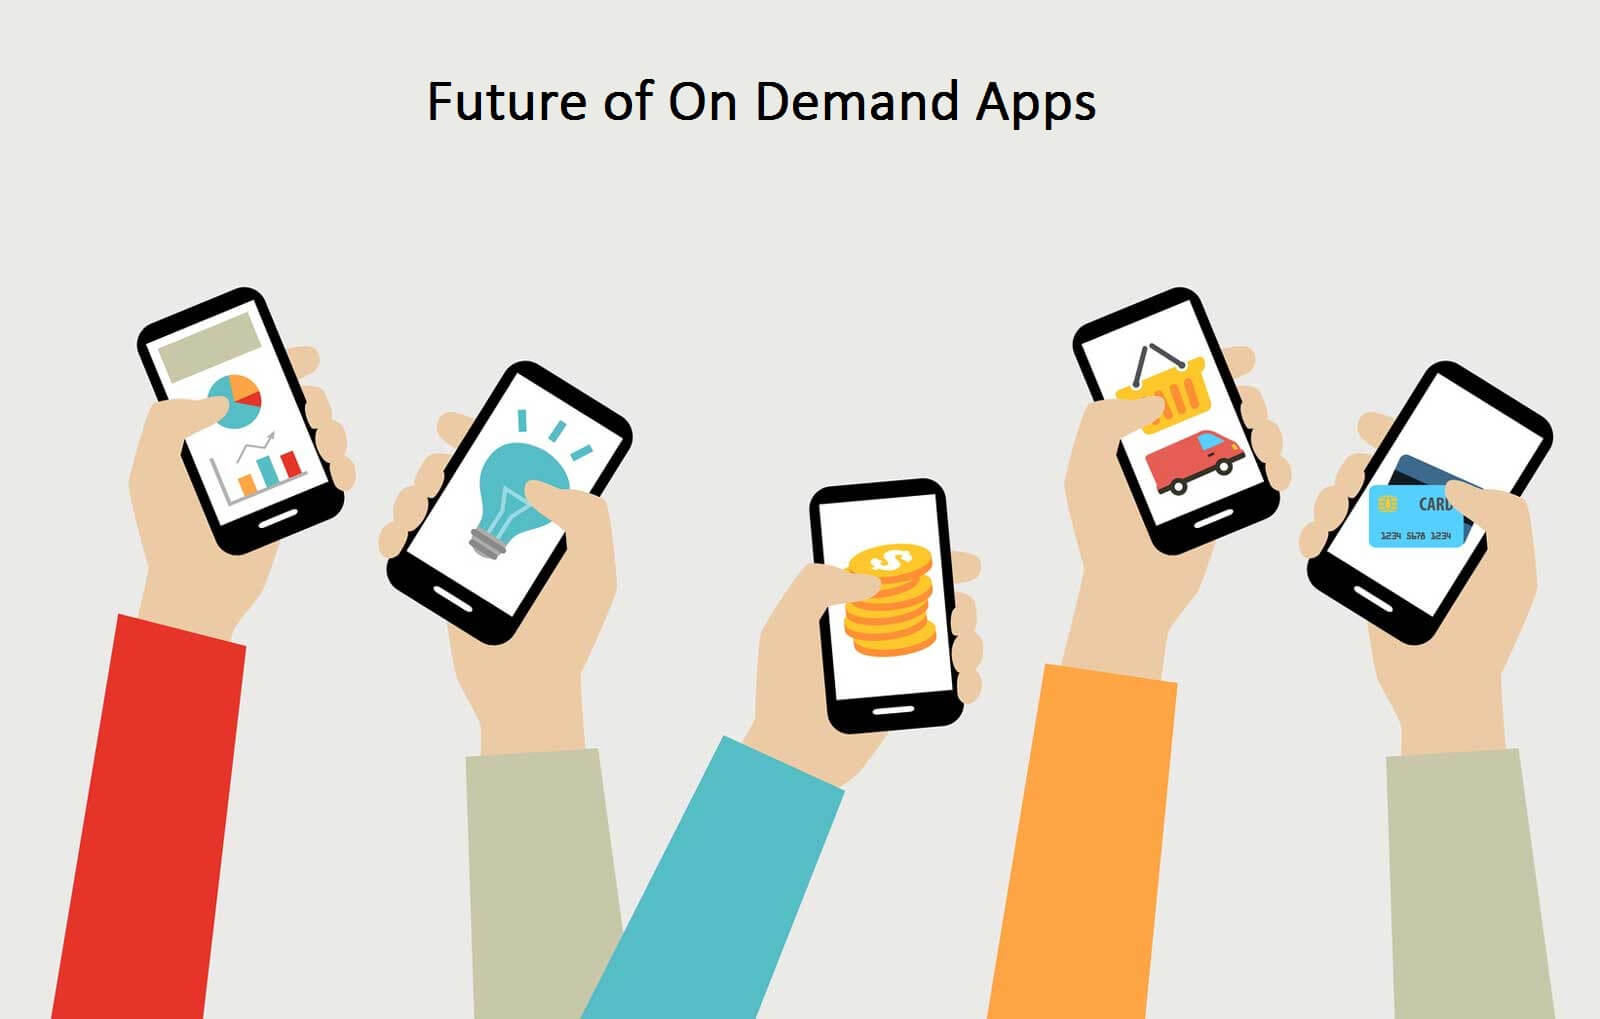 On-Demand Mobile Apps to Watch Out for in 2019